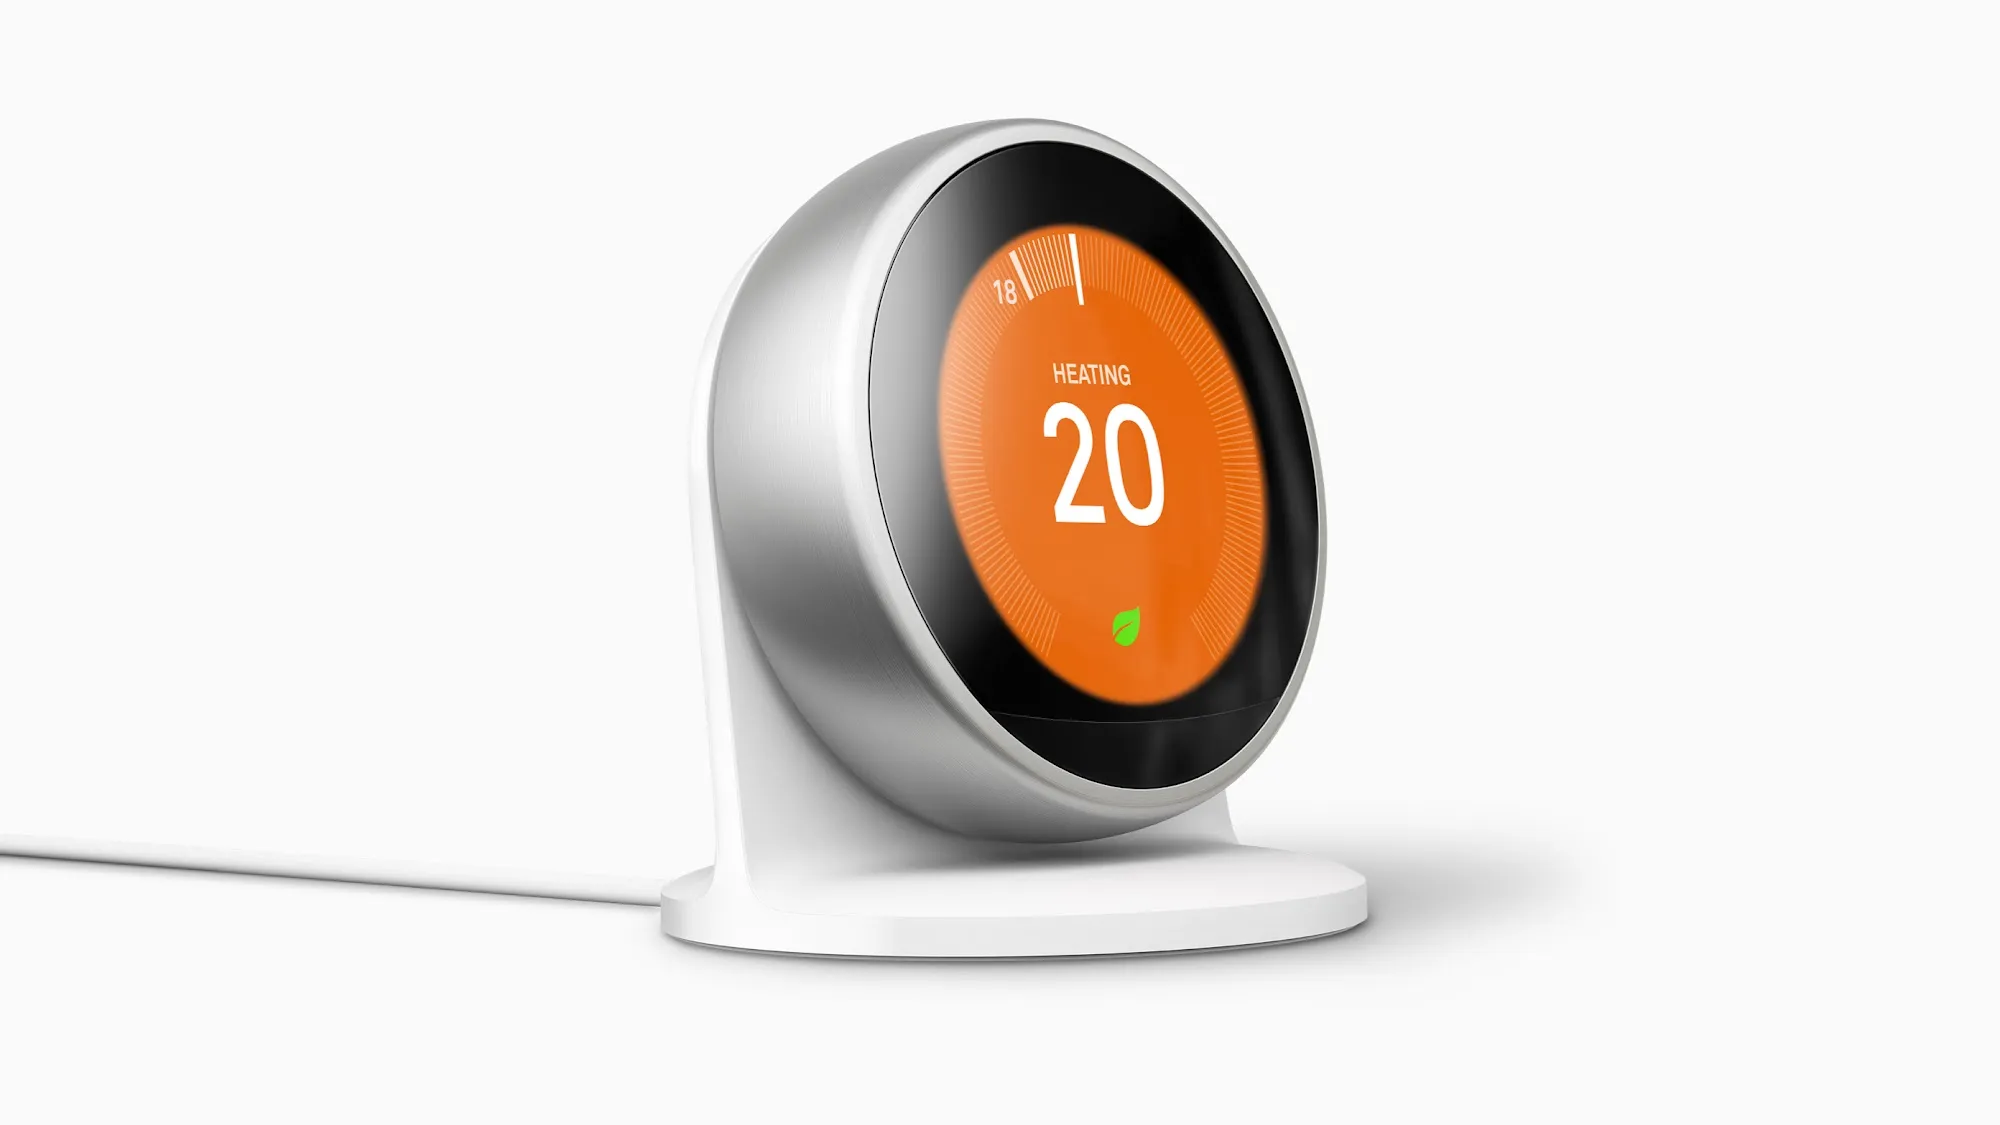 GOOGLE NEST 3RD GENERATION SMART THERMOSTAT WITH A STAND